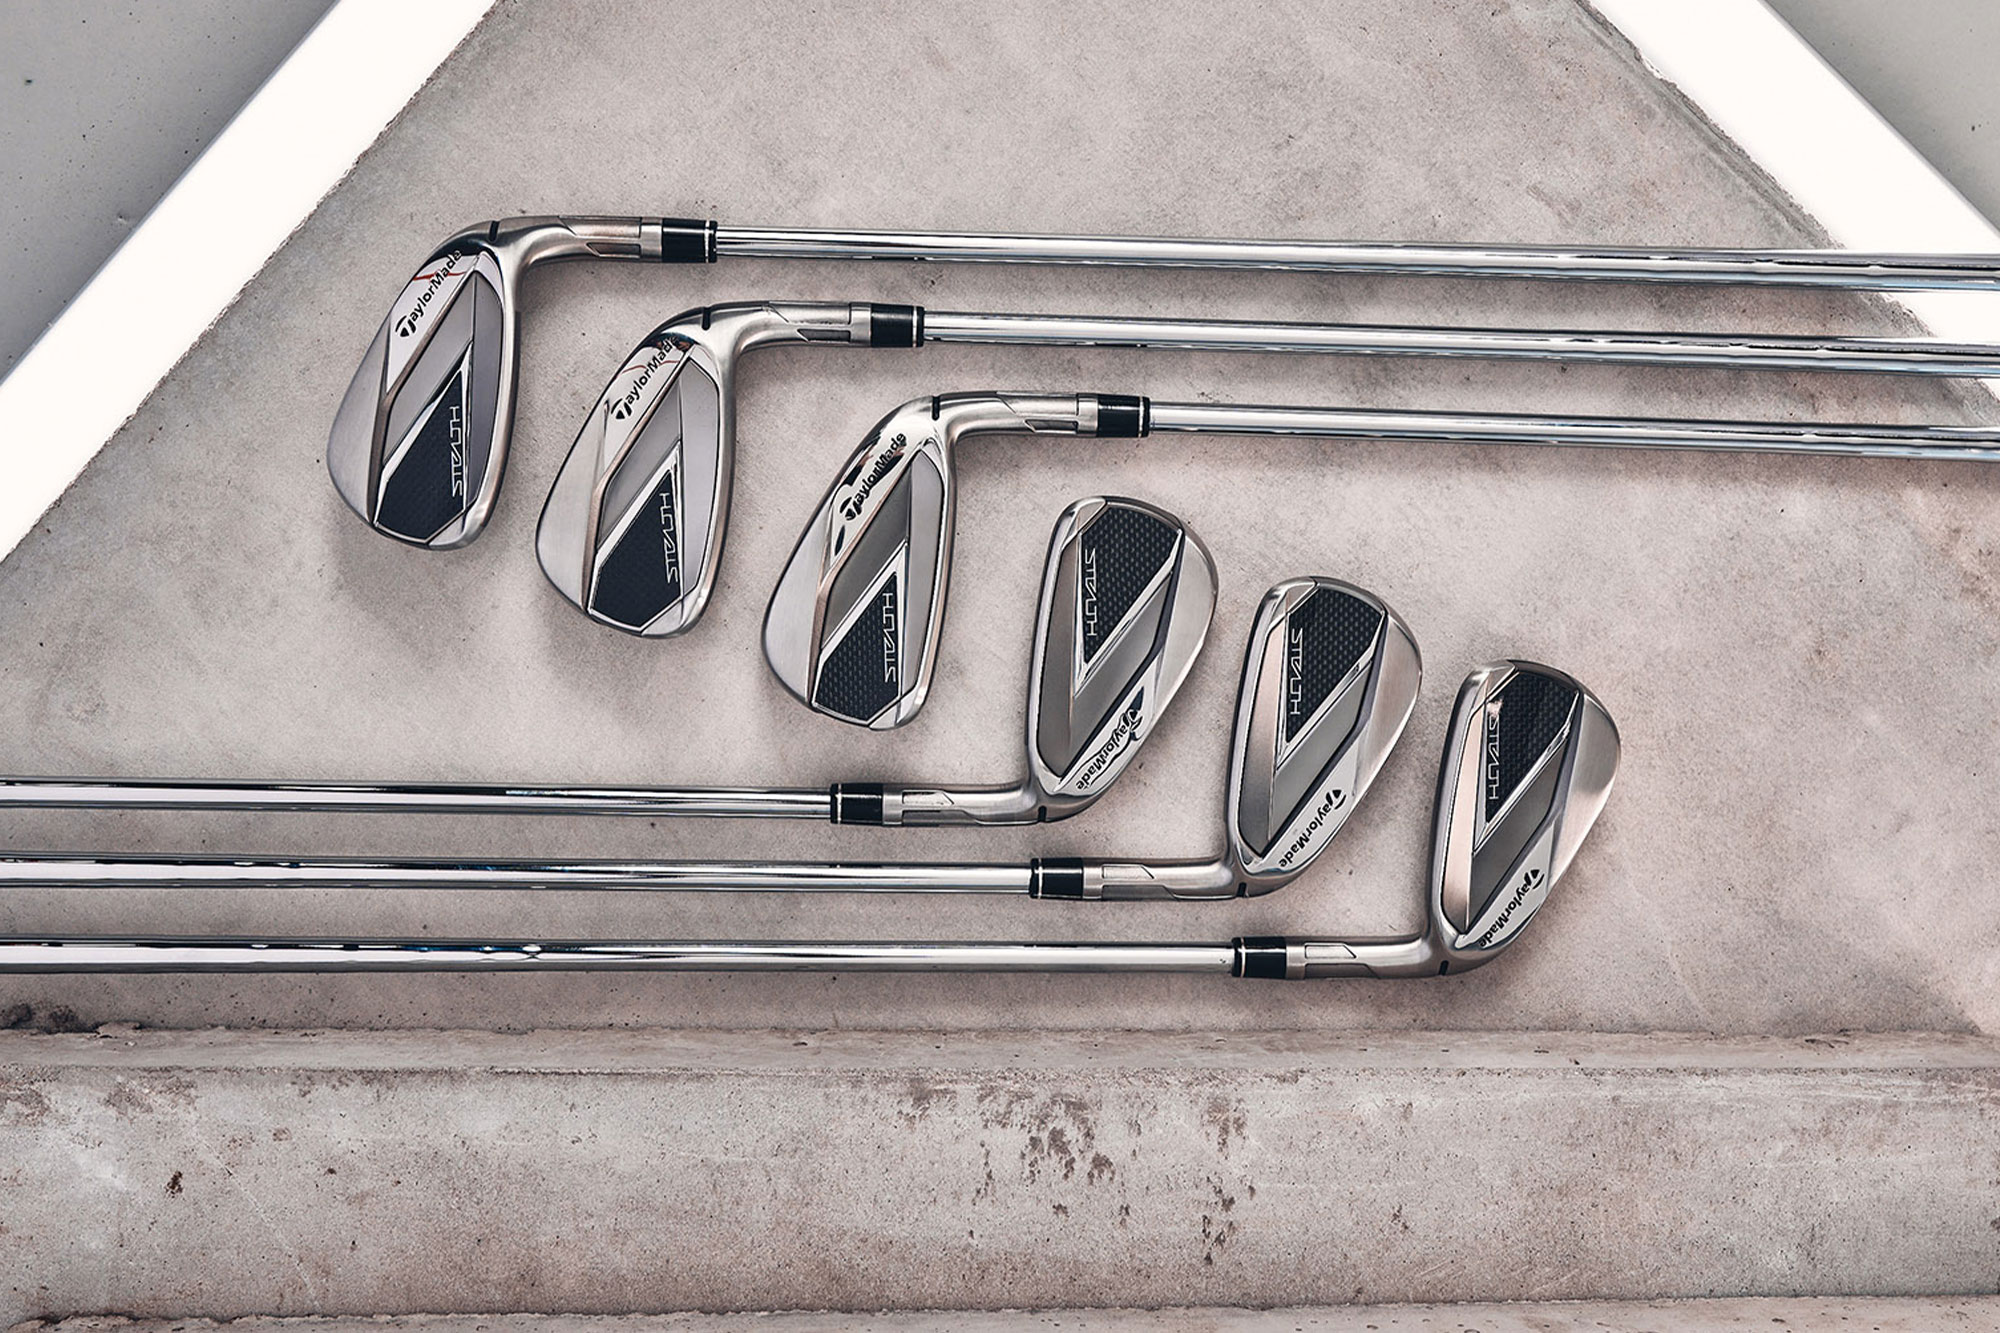 TaylorMade Stealth irons